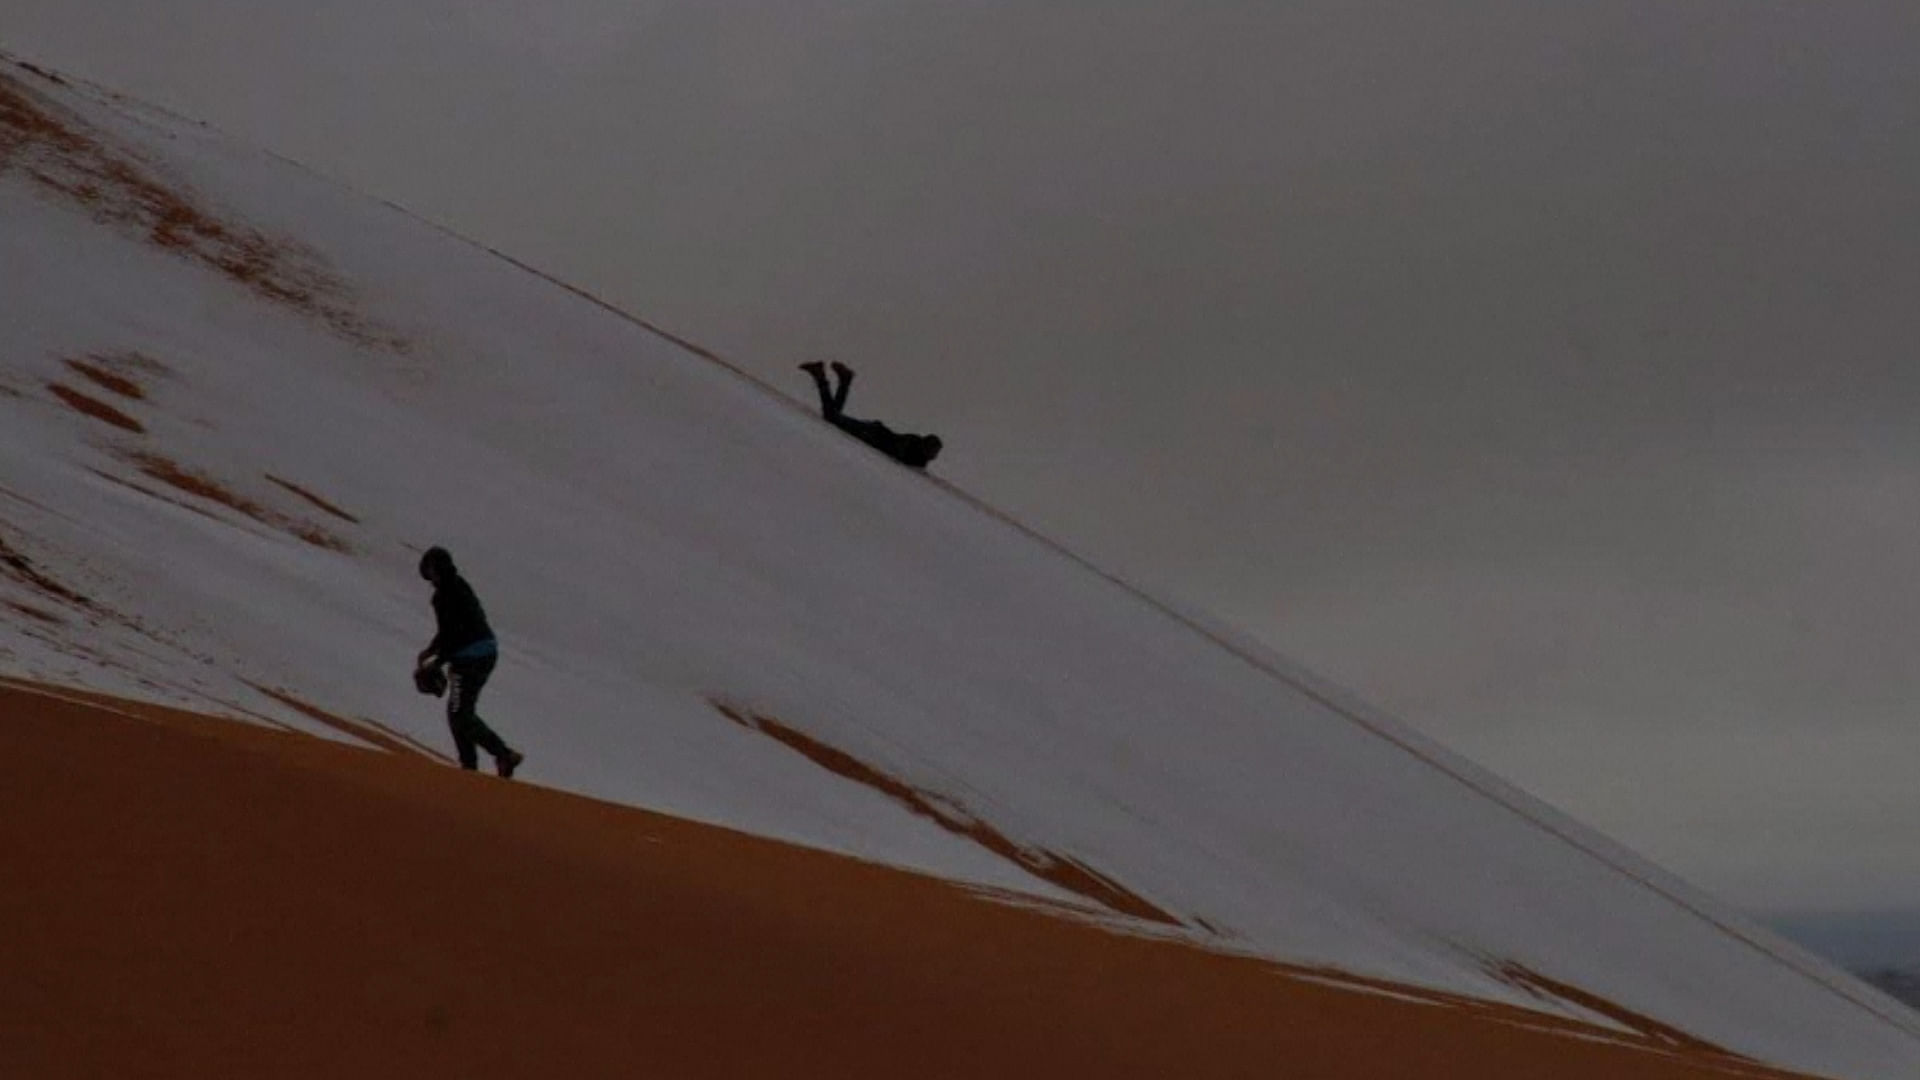 Locals made the most of this opportunity, of playing in snow in middle of a desert.